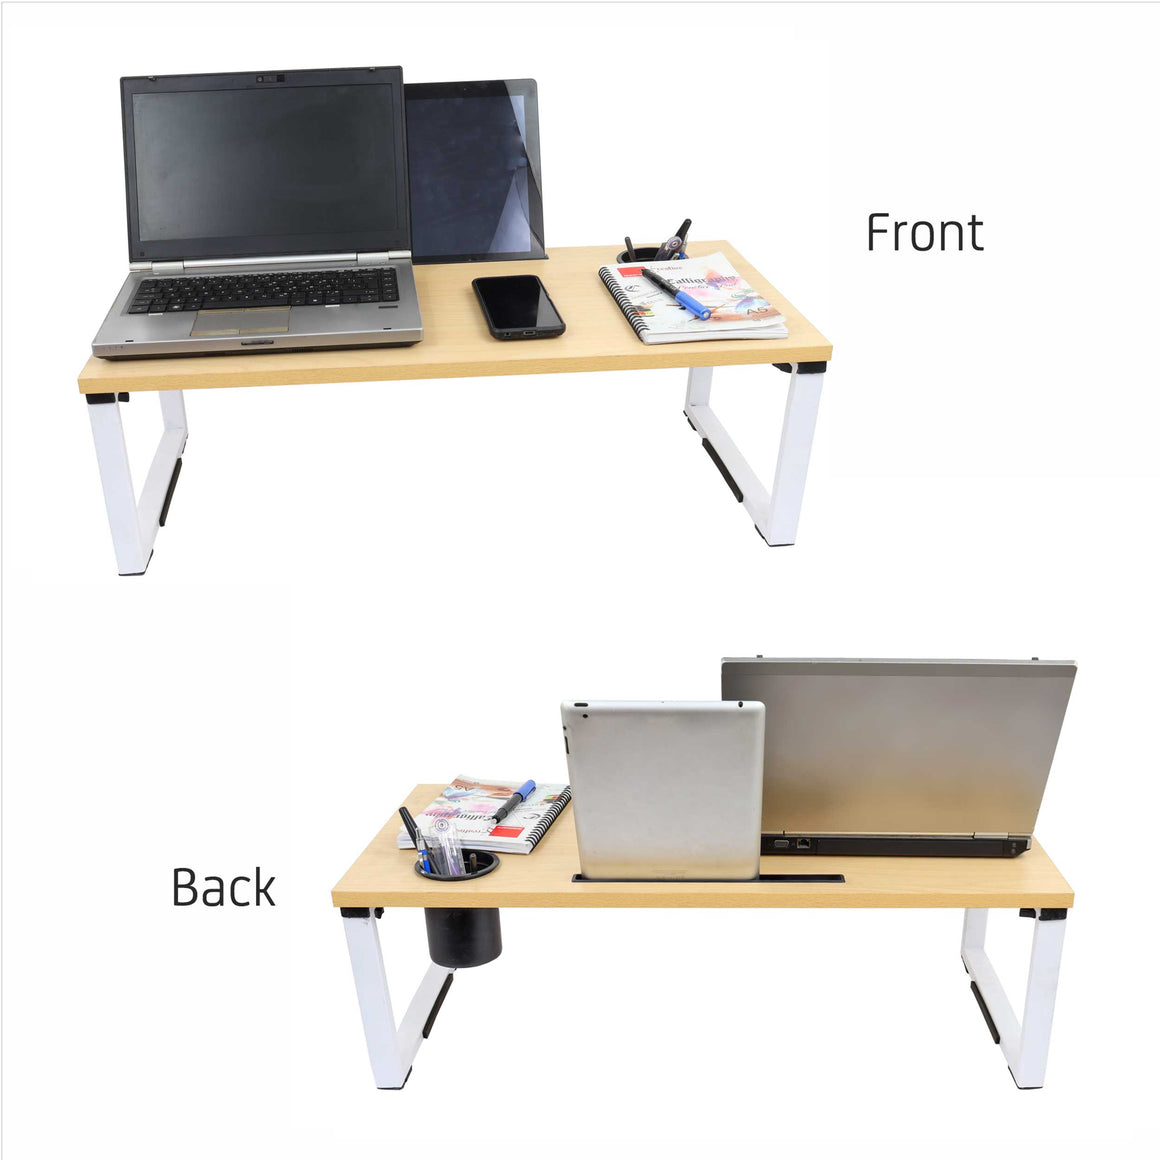 Isomars Bed Desk/Floor Desk Laptop Study Table for Work from Home, Online Classes, Card Games and Kid's Activities (Wooden - Large)